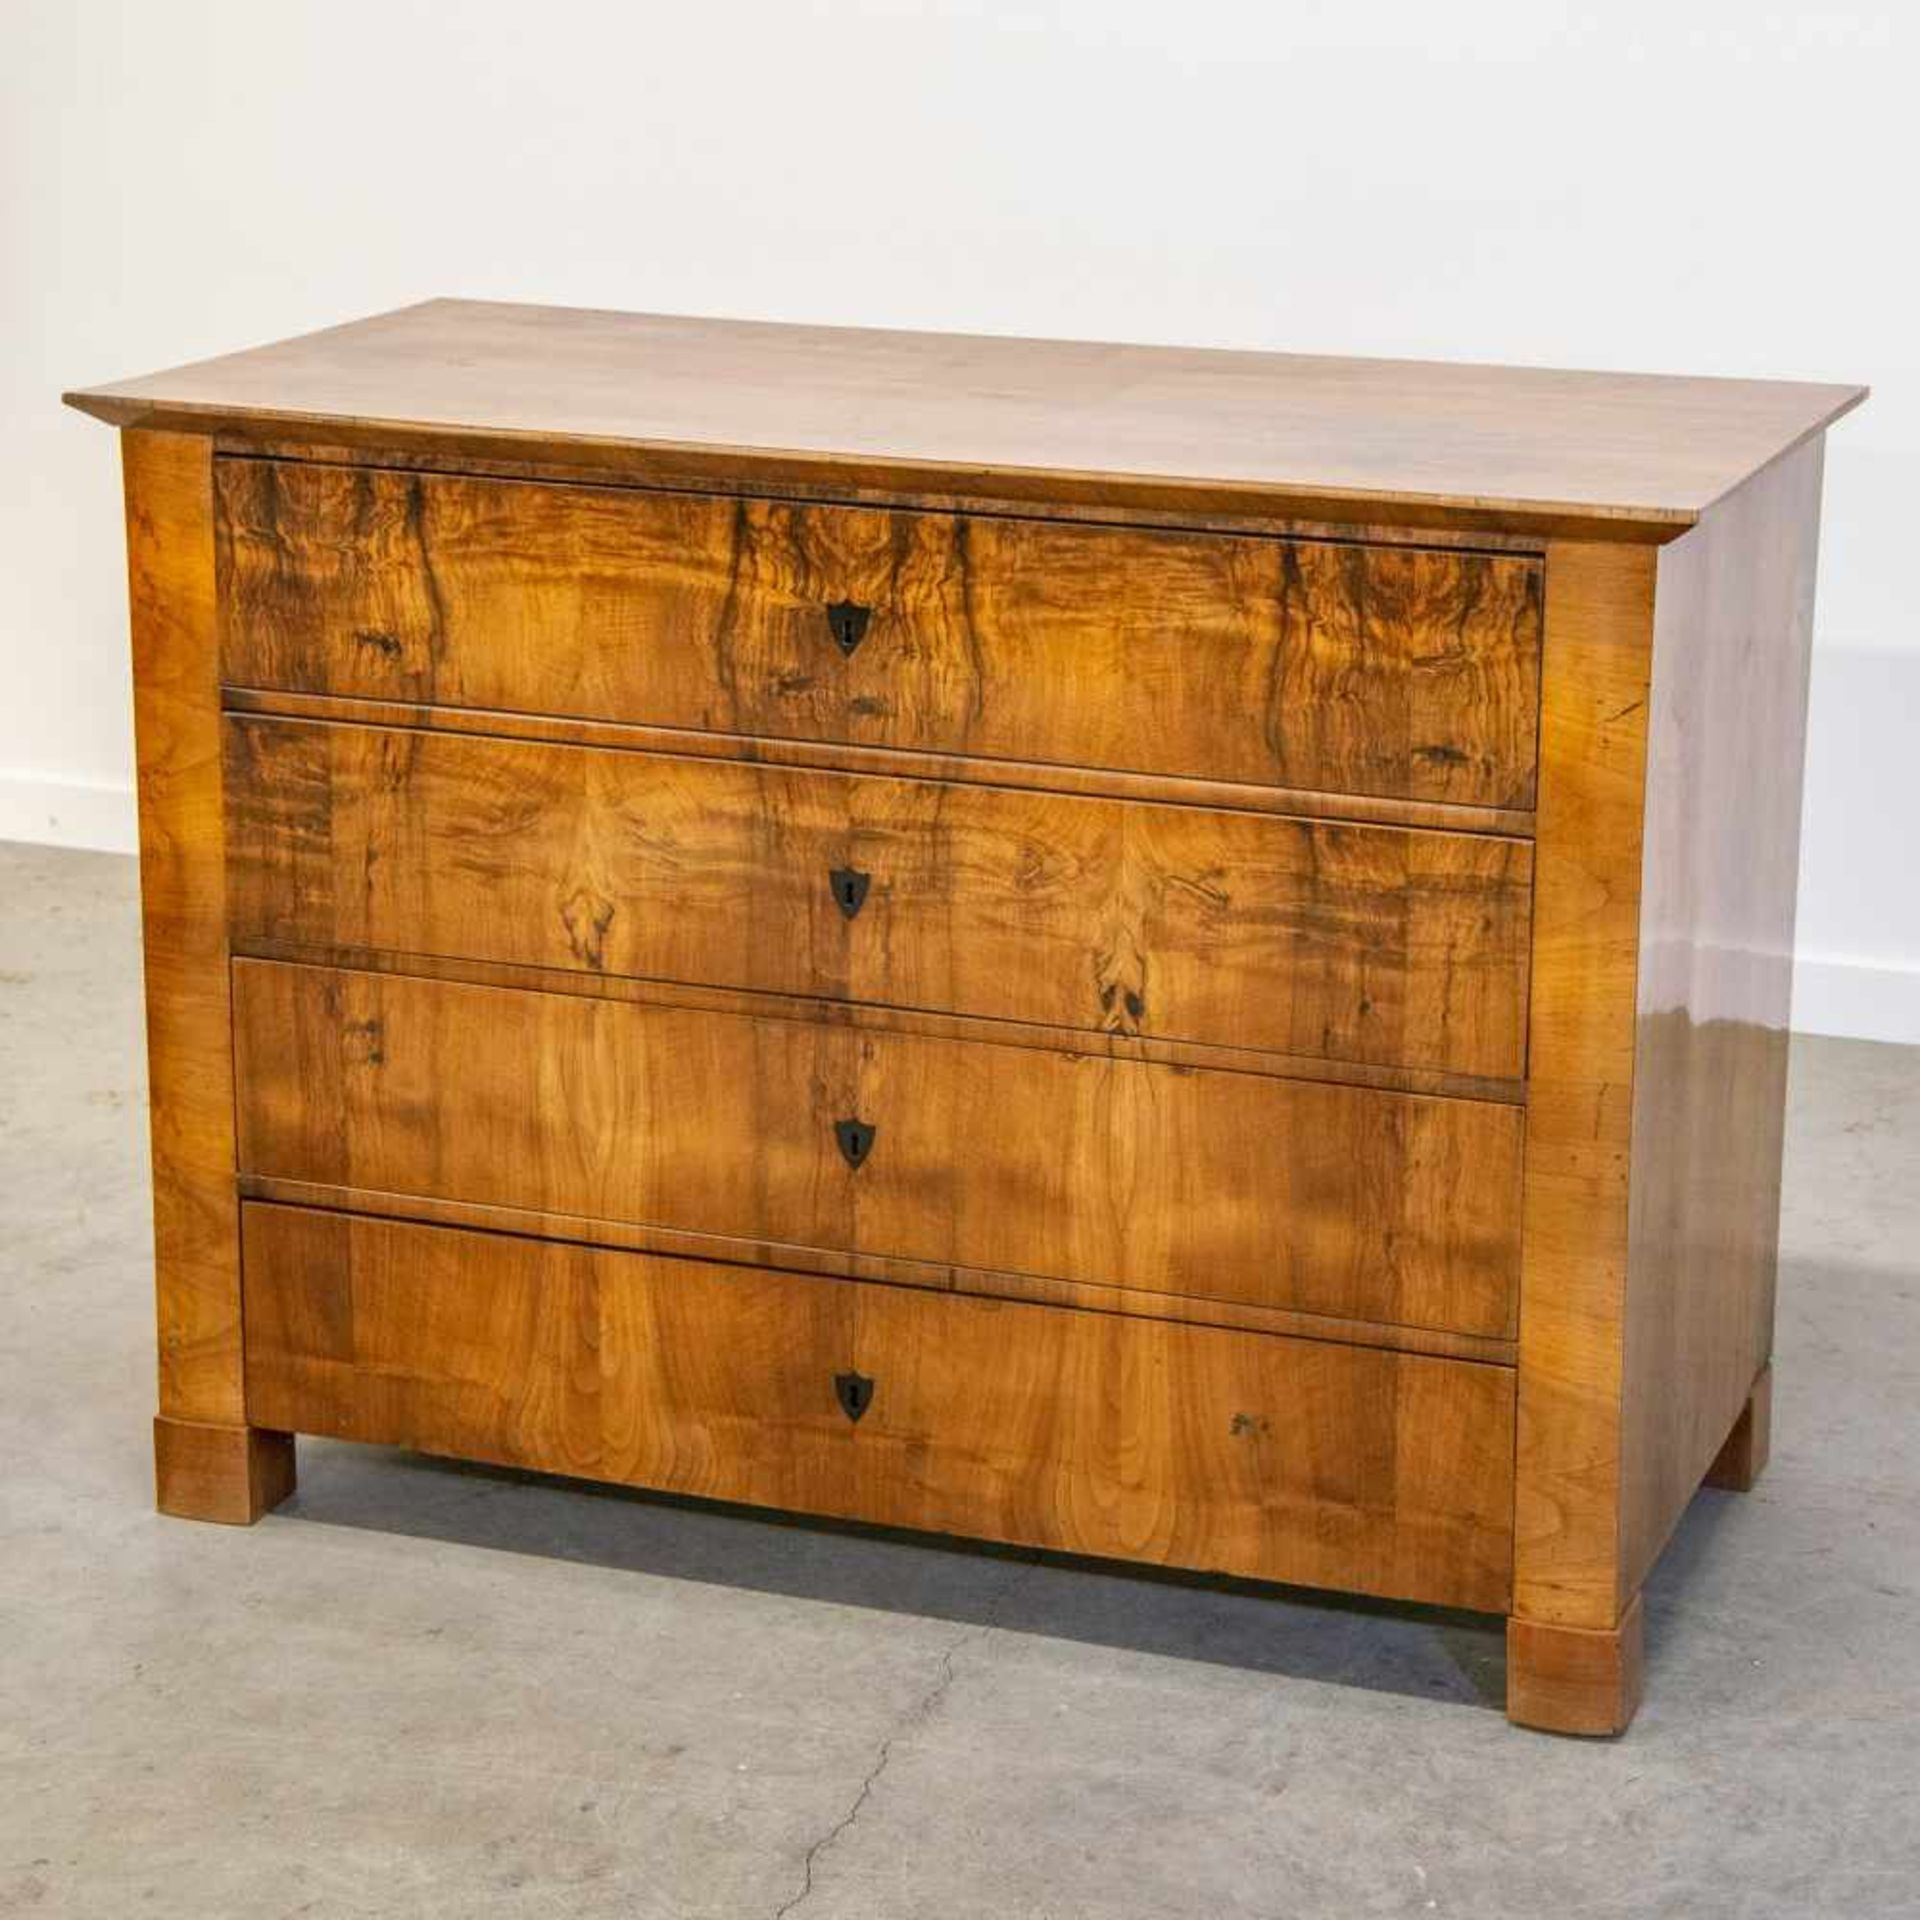 Commode with 4 drawers, probably of eastern european origin. Length: 125 cm , Width: 60 cm, Hight: